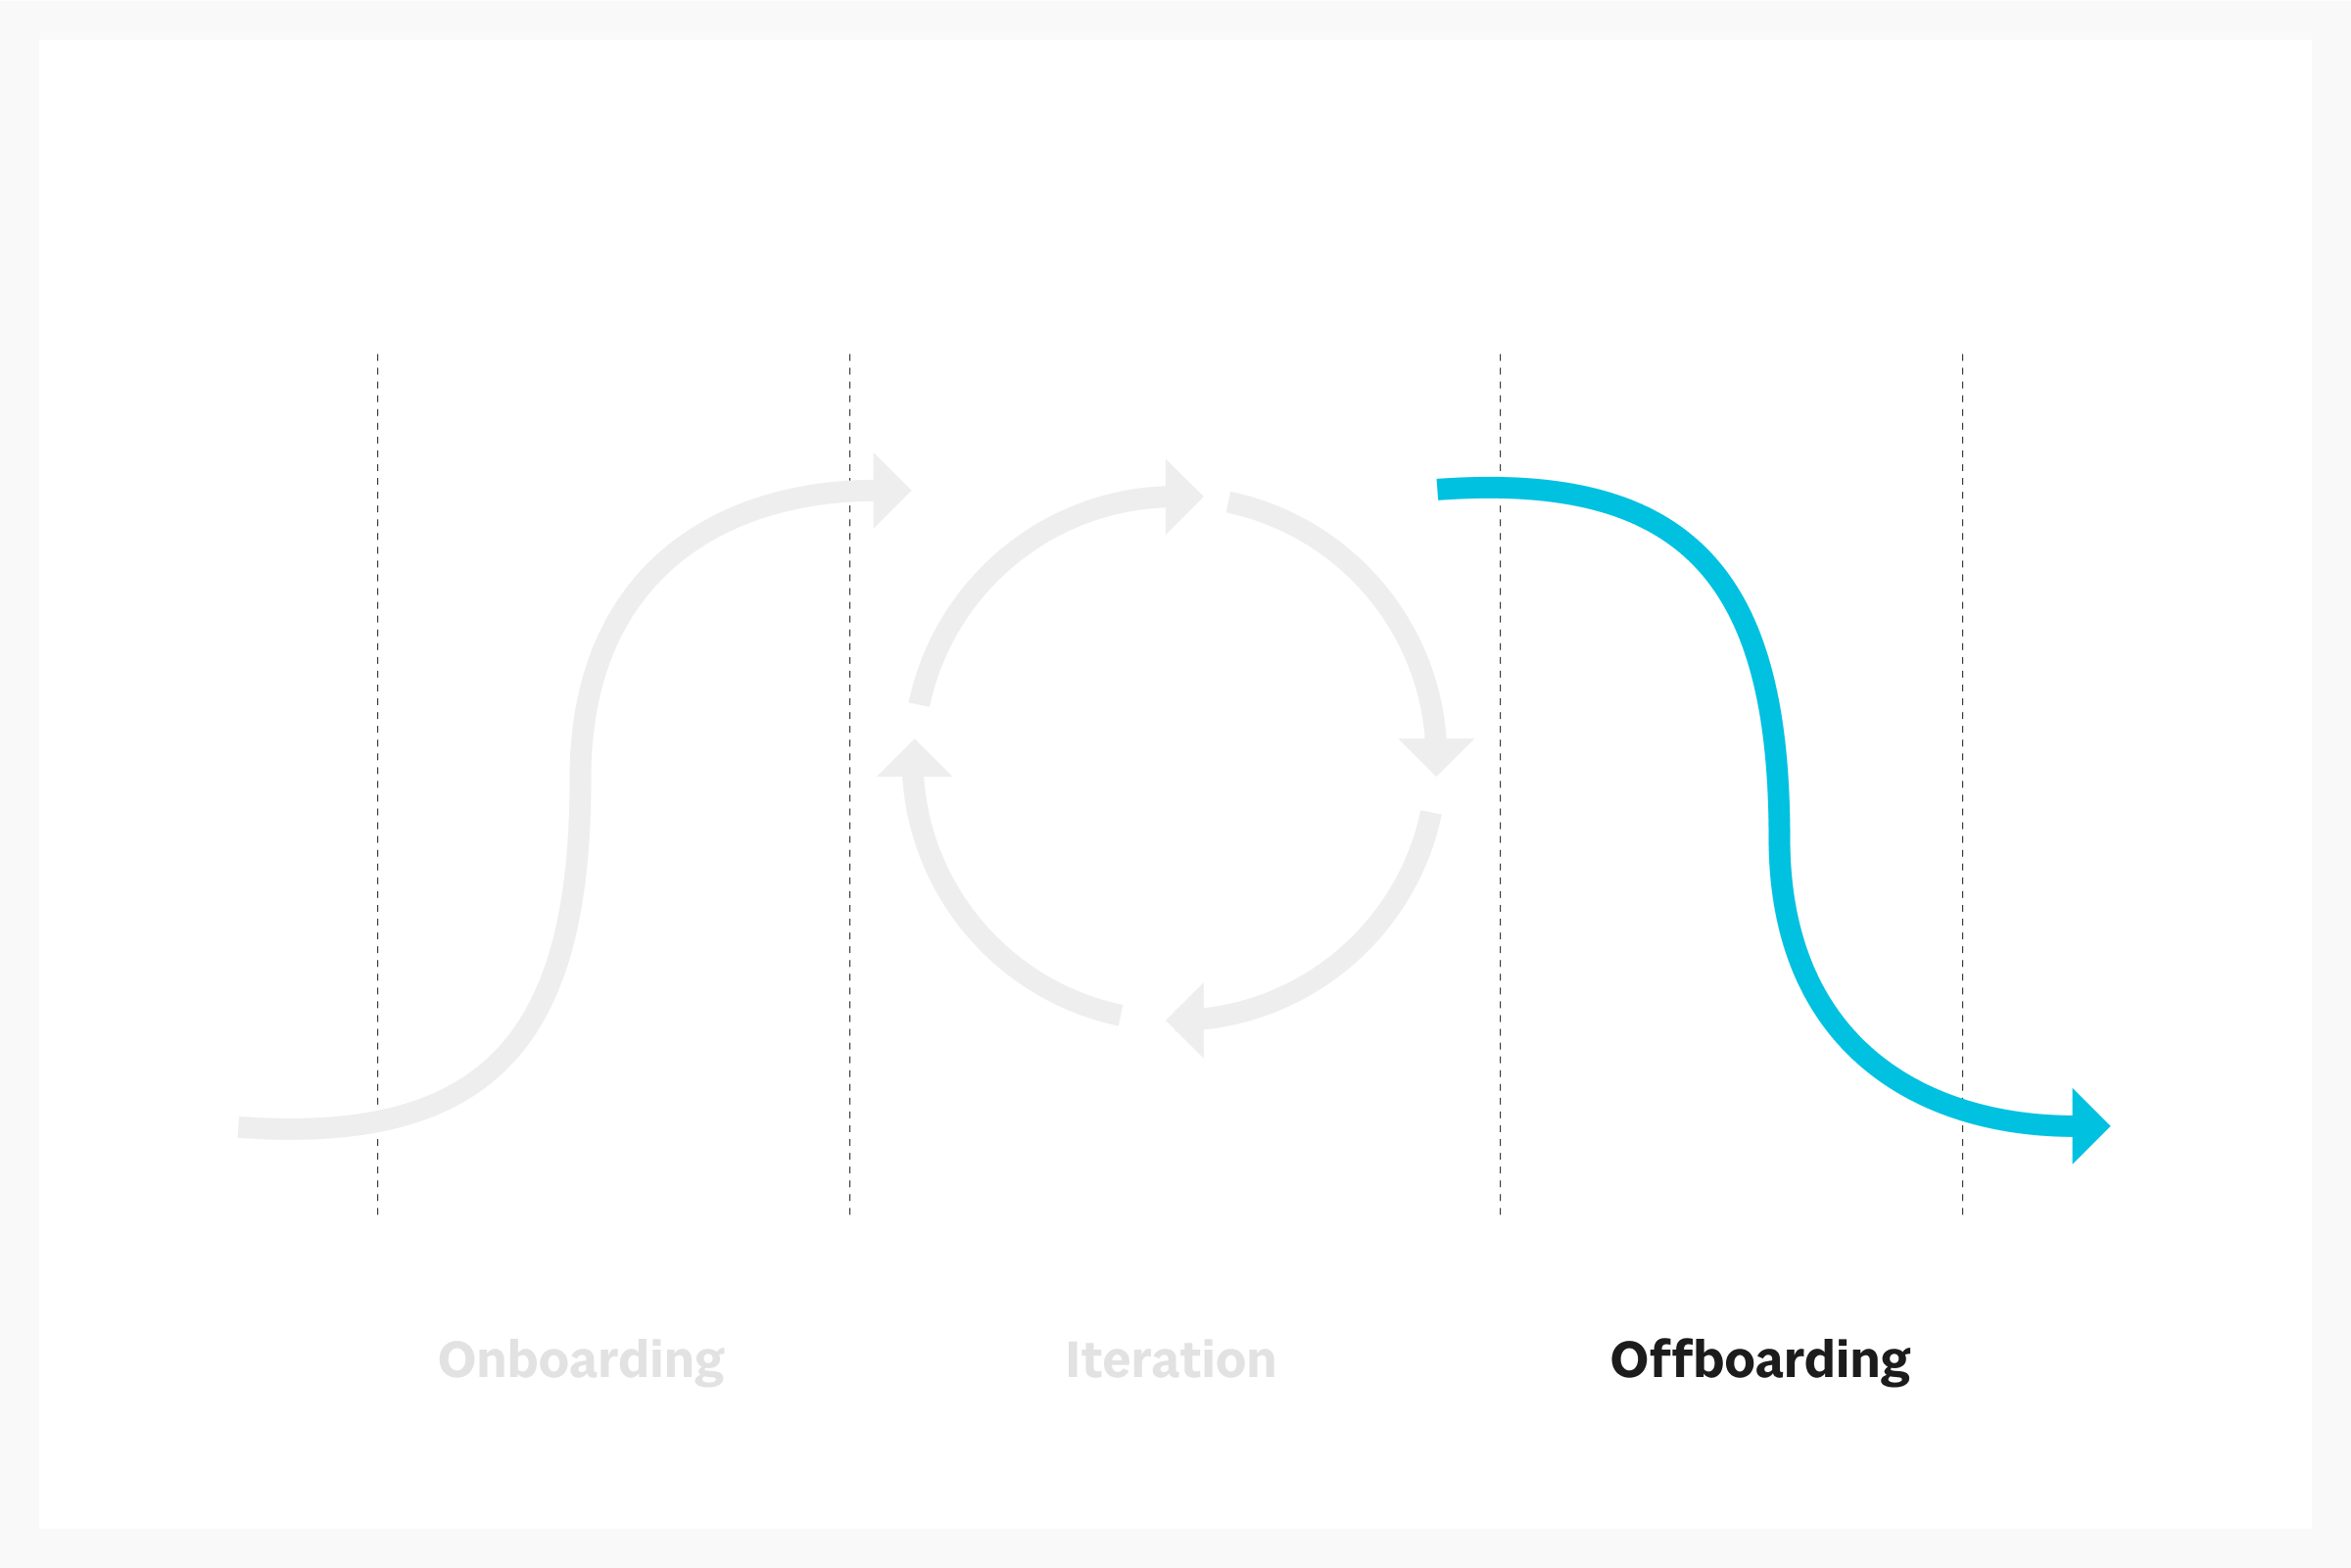 A chart separated into three equal sections highlighting the third section with a teal a line arrow in a down motion representing offboarding with first and second sections greyed out.